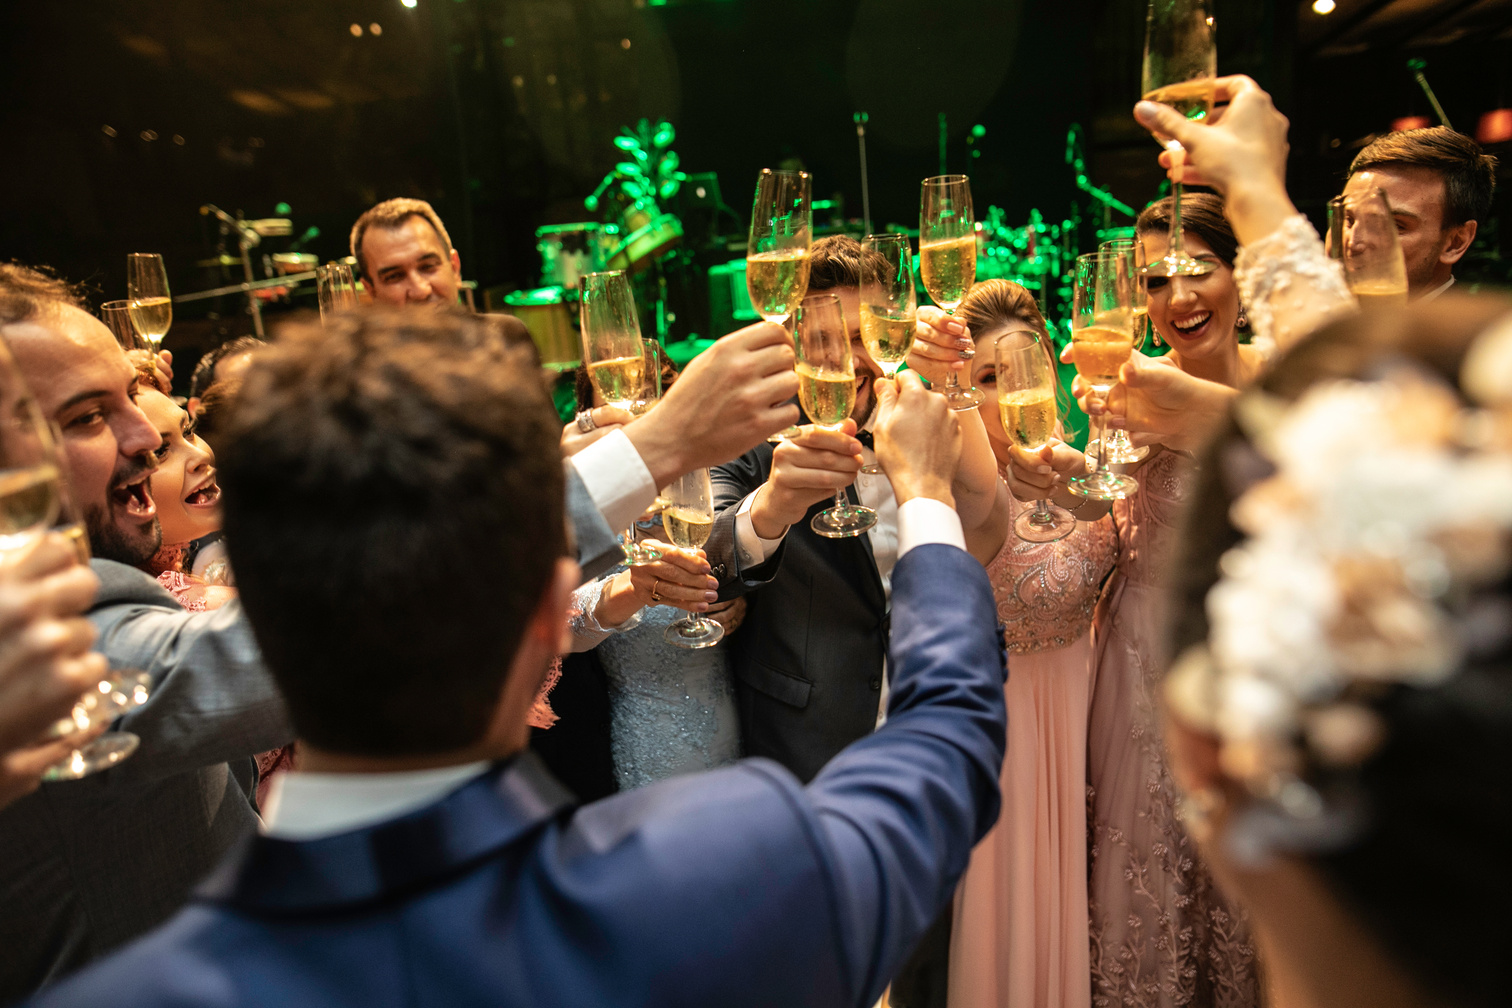 Bride, groom and wedding guests making a toast